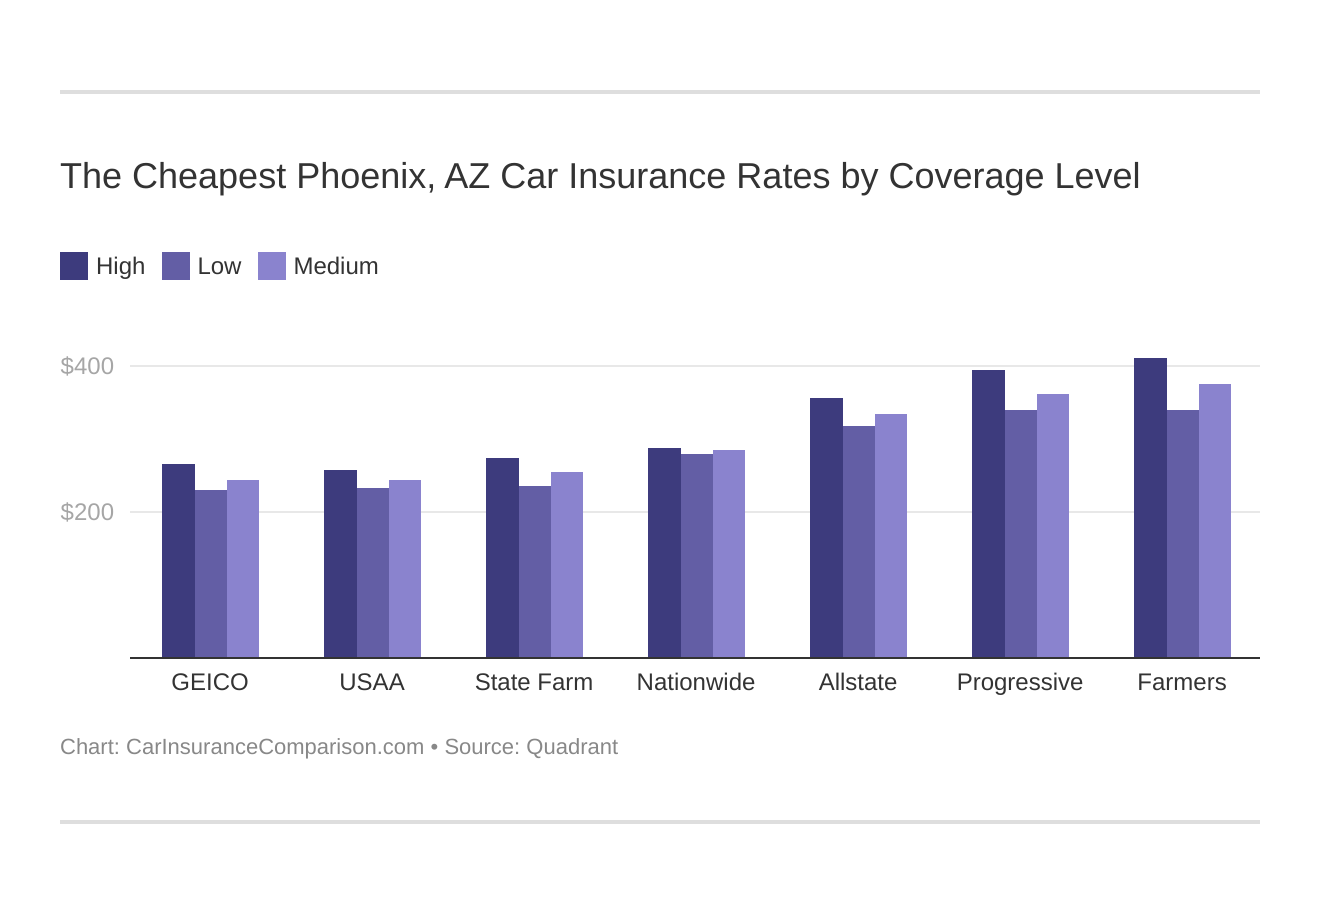 The Cheapest Phoenix, AZ Car Insurance Rates by Coverage Level